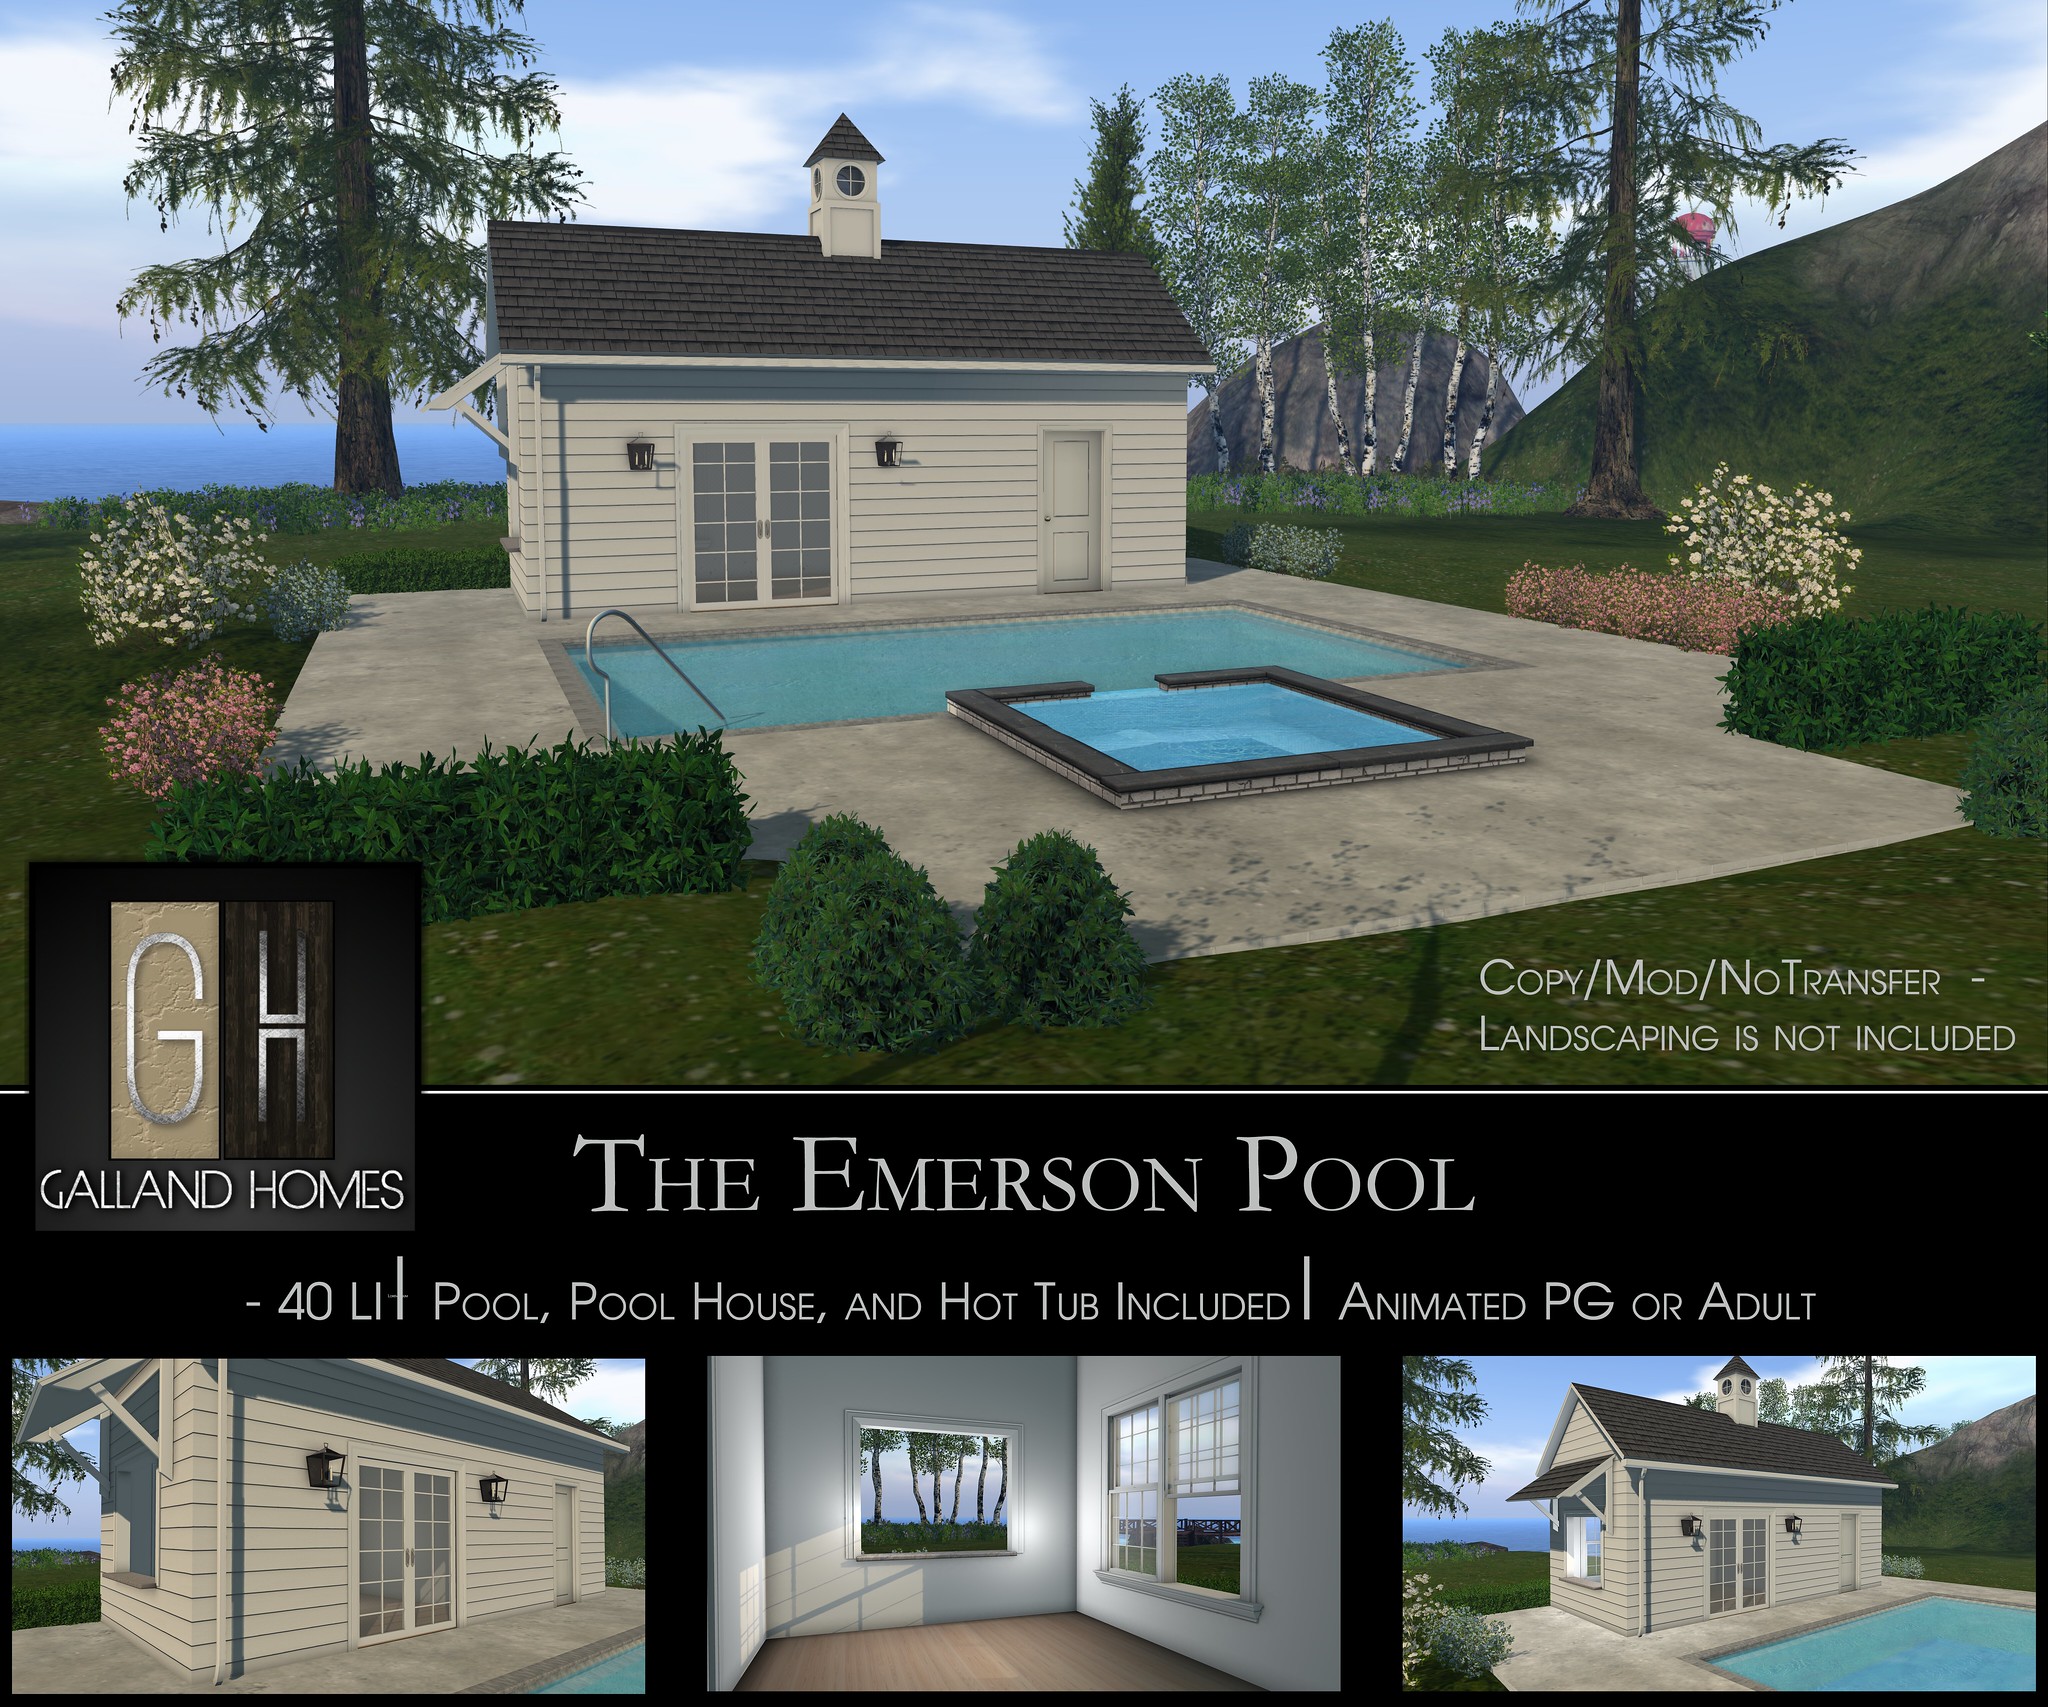 Galland Homes – The Emerson Pool